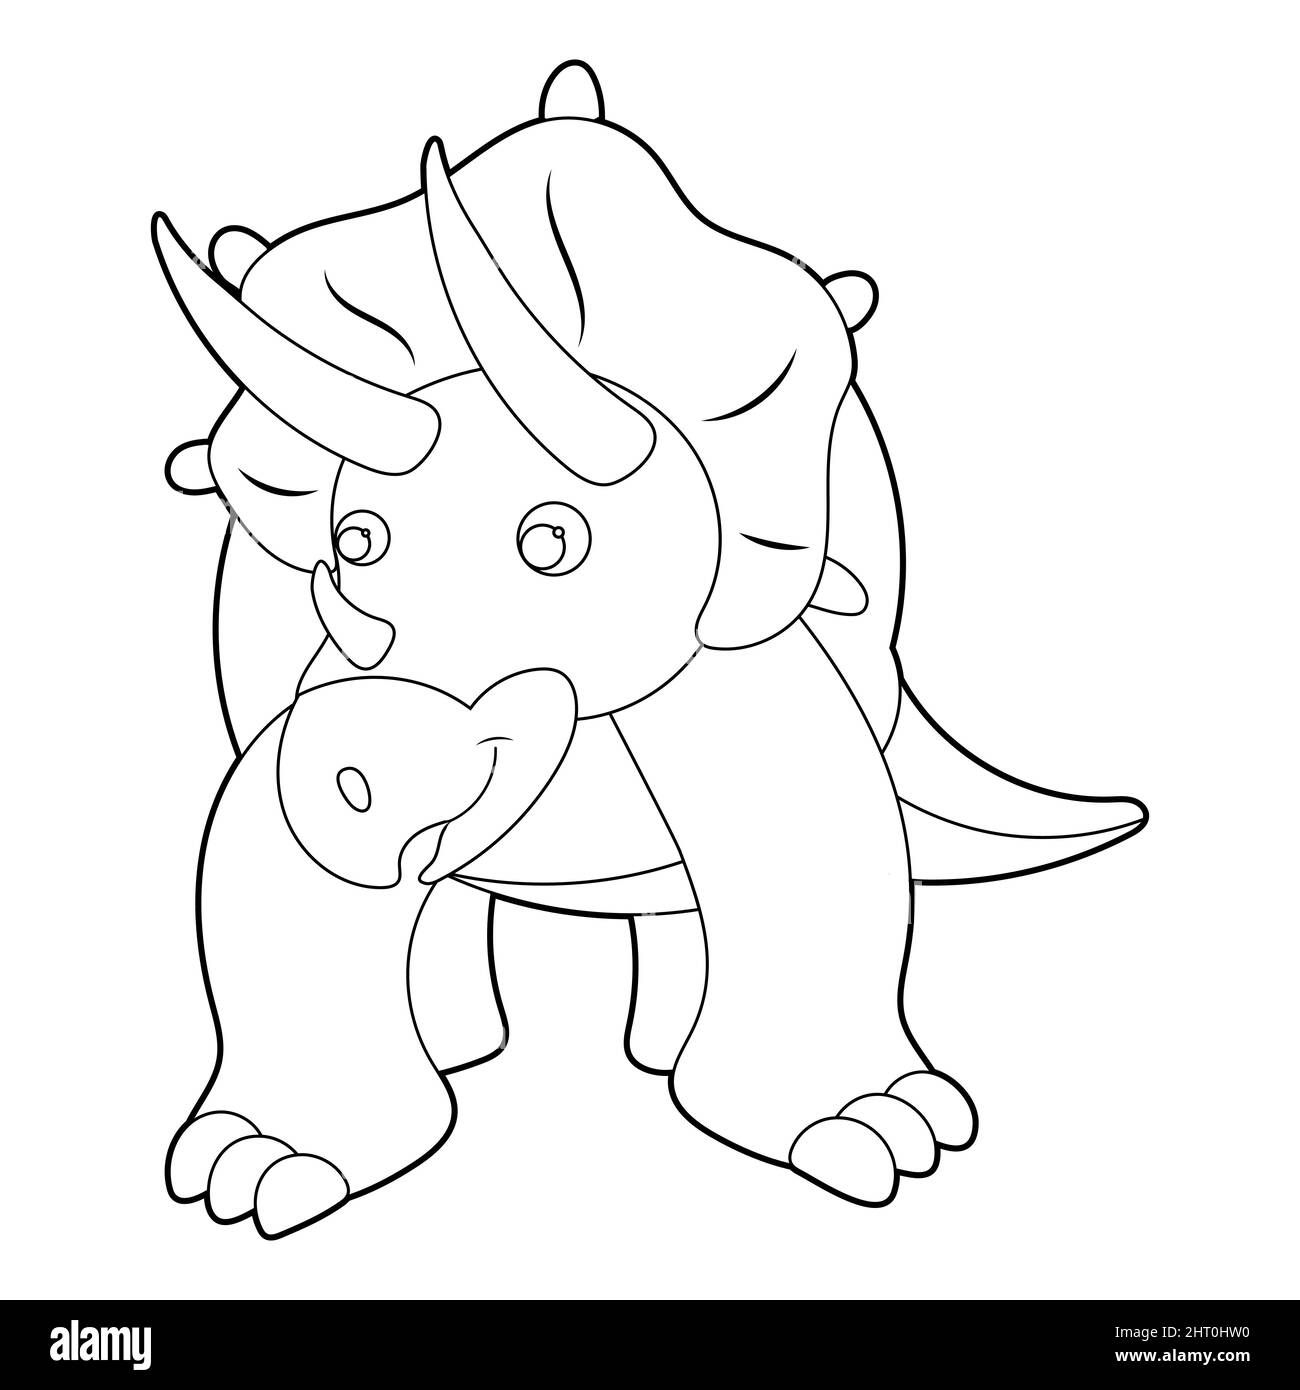 Coloring book for kids, triceratops dinosaur. Vector isolated on a white background Stock Vector